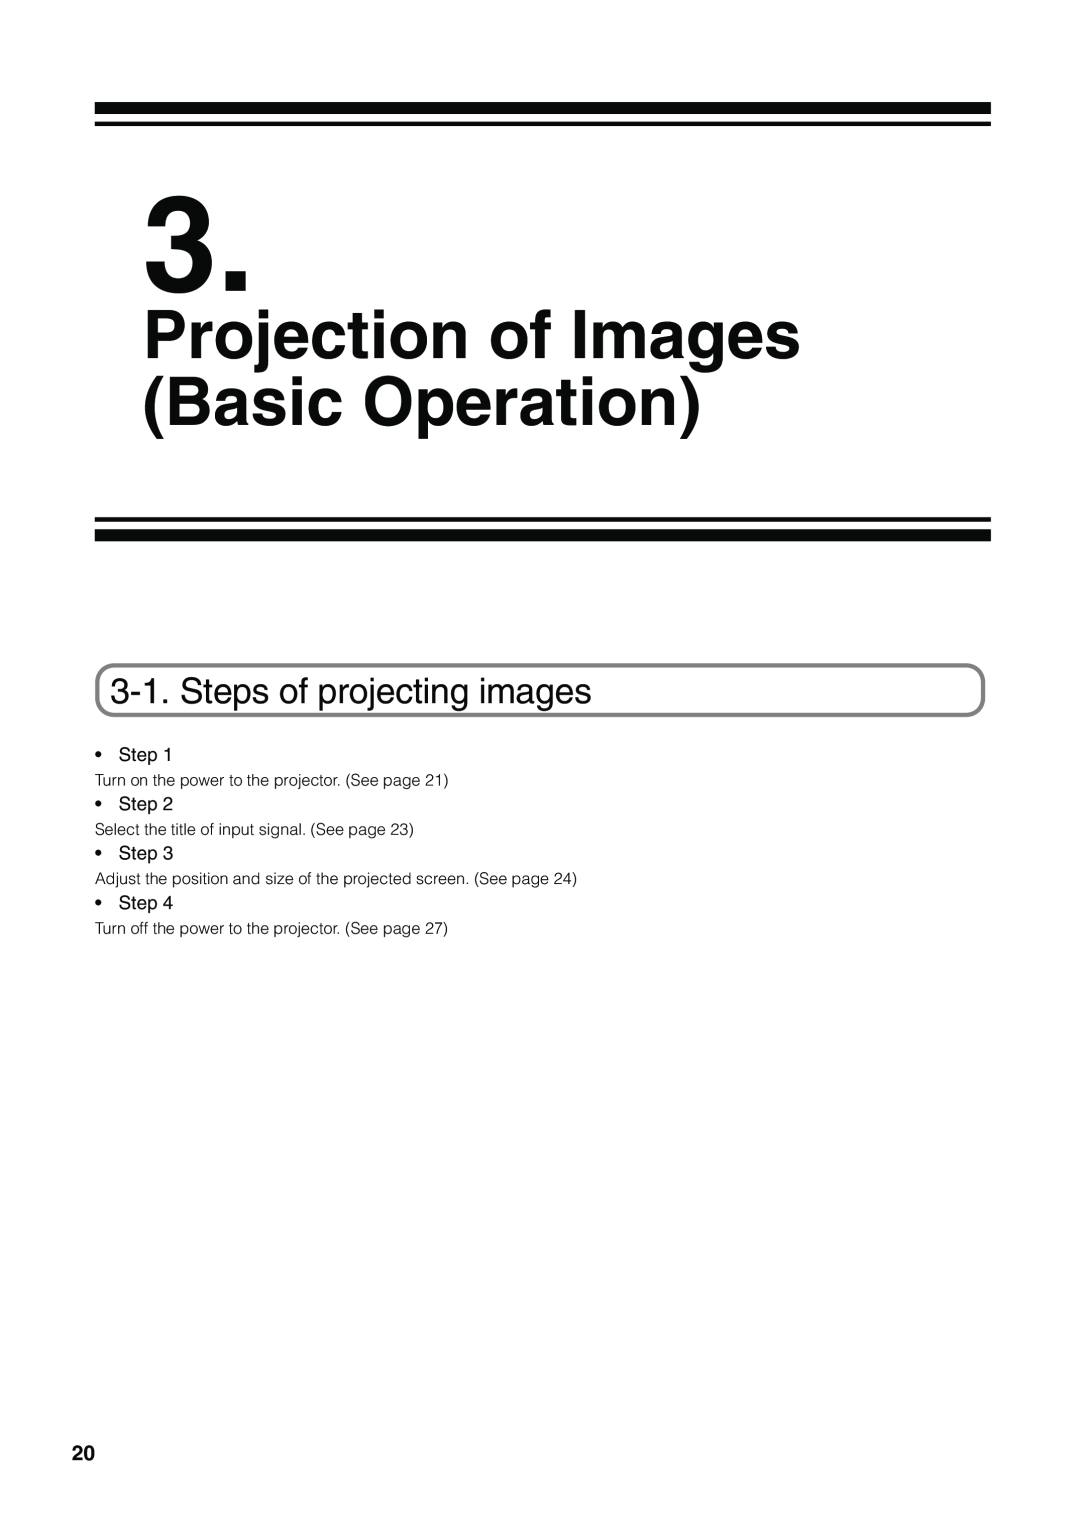 NEC NC1600C user manual Projection of Images Basic Operation, Steps of projecting images 